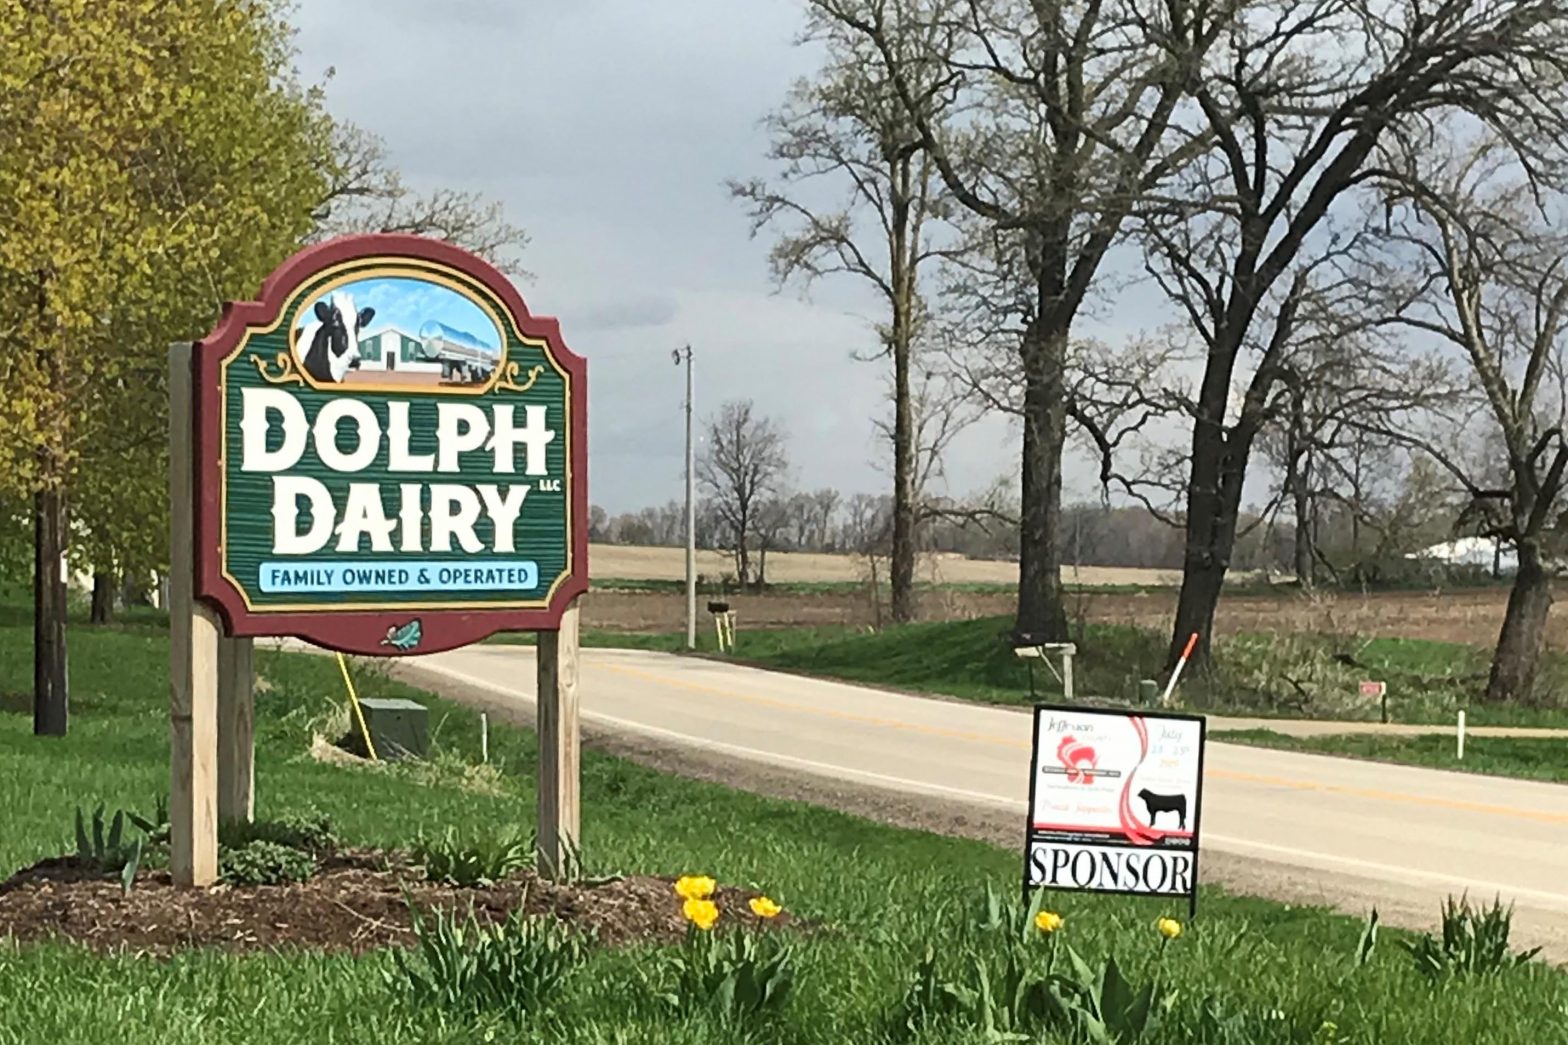 Dolph Dairy LLC is a partnership between Don and Patricia Dolph and their son, Chet, along with Chet’s wife, Patty.  Patty takes the lead on calf care in addition to her fresh cow responsibilities.